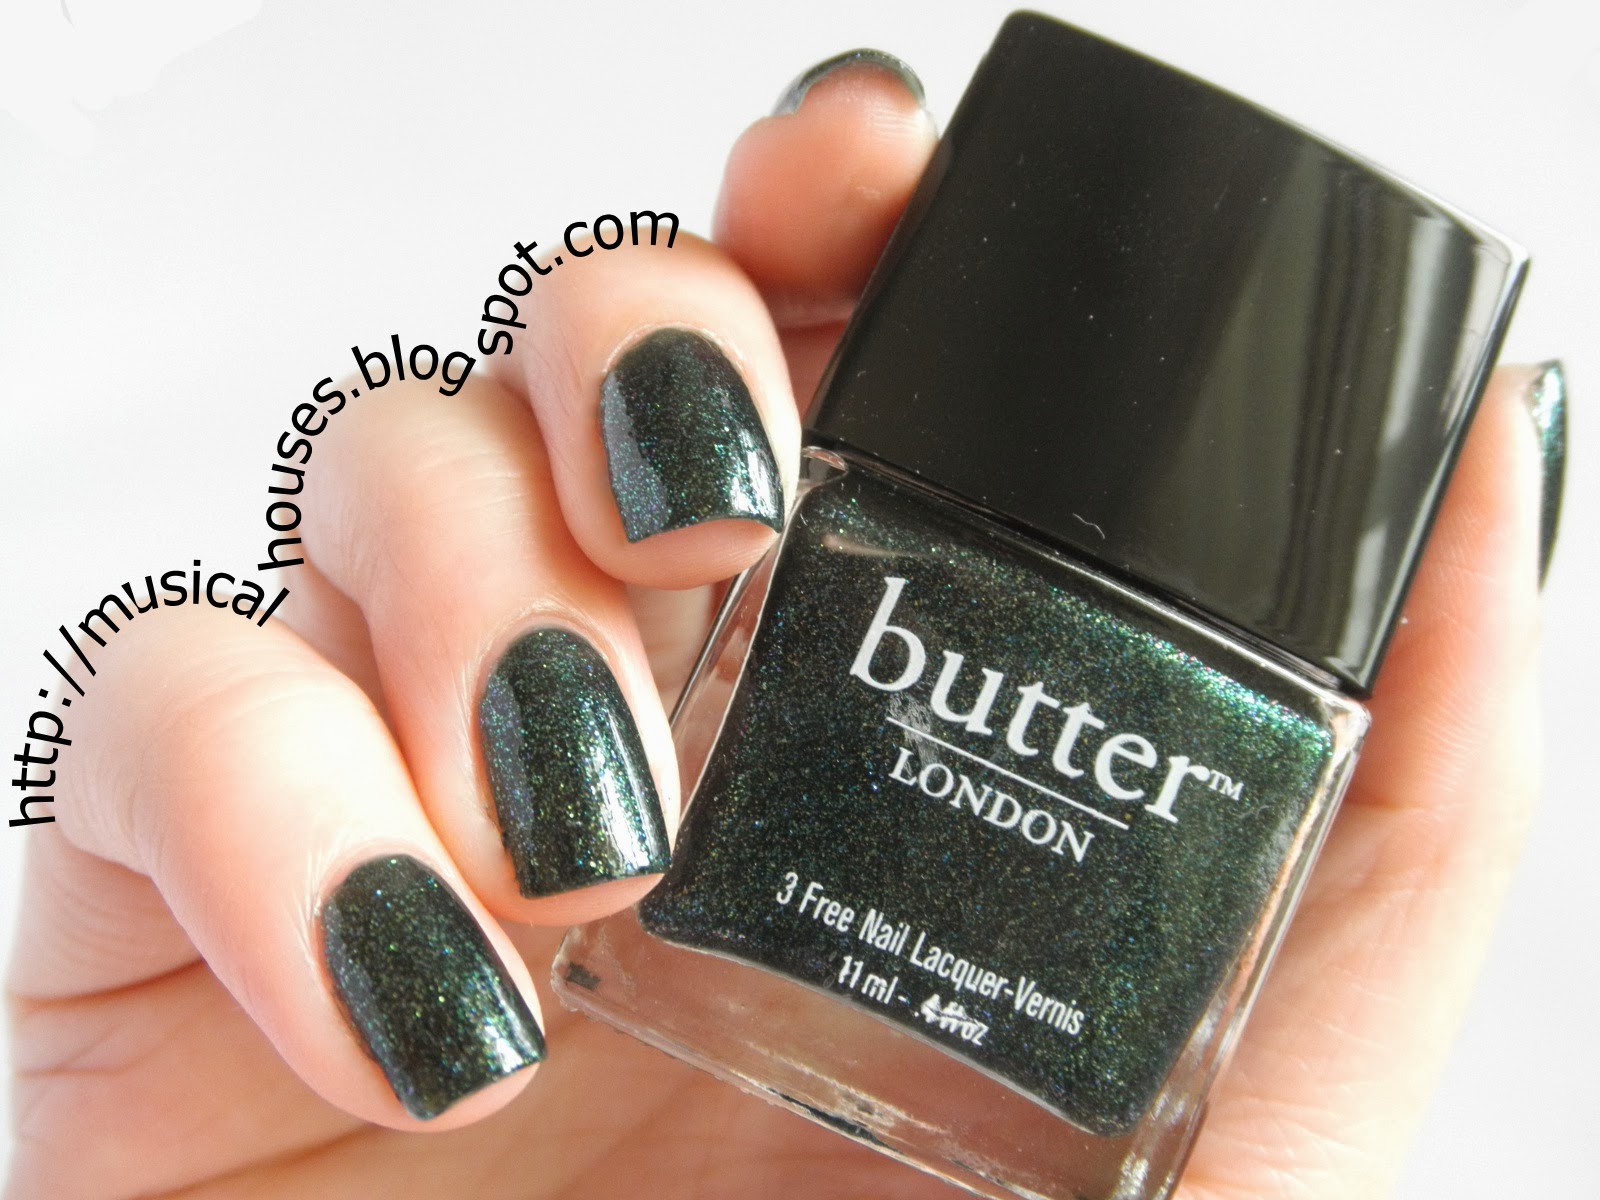 9. Butter London Patent Shine 10X Nail Lacquer in "Her Majesty's Red" - wide 2